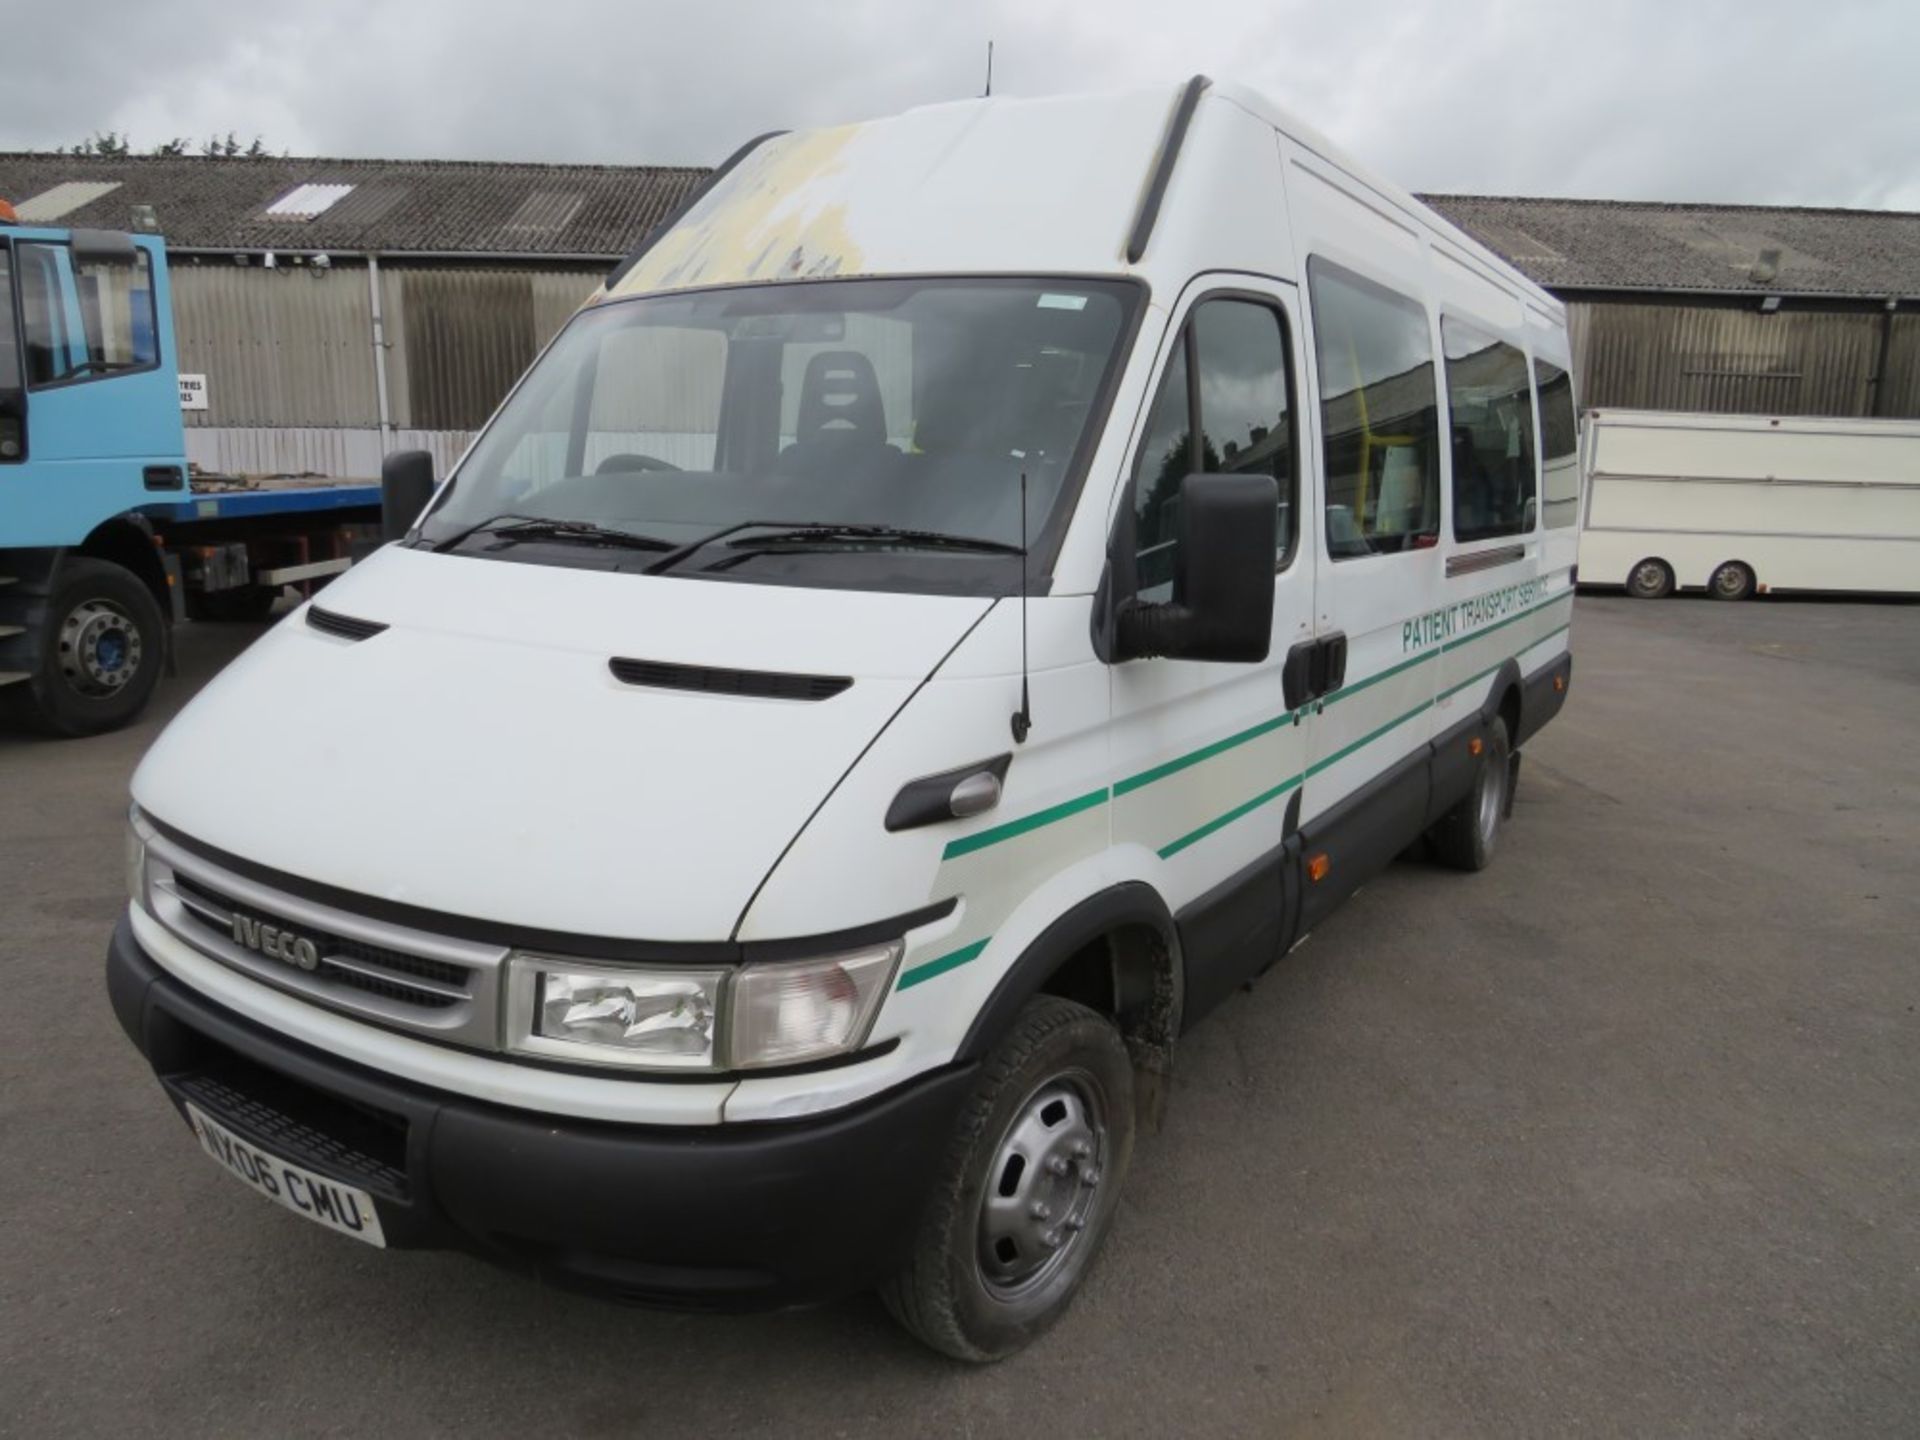 06 reg IVECO DAILY 40C14 BUS, 1ST REG 03/06, 120864KM WARRANTED, V5 HERE, 1 OWNER FROM NEW [+ VAT] - Image 2 of 6